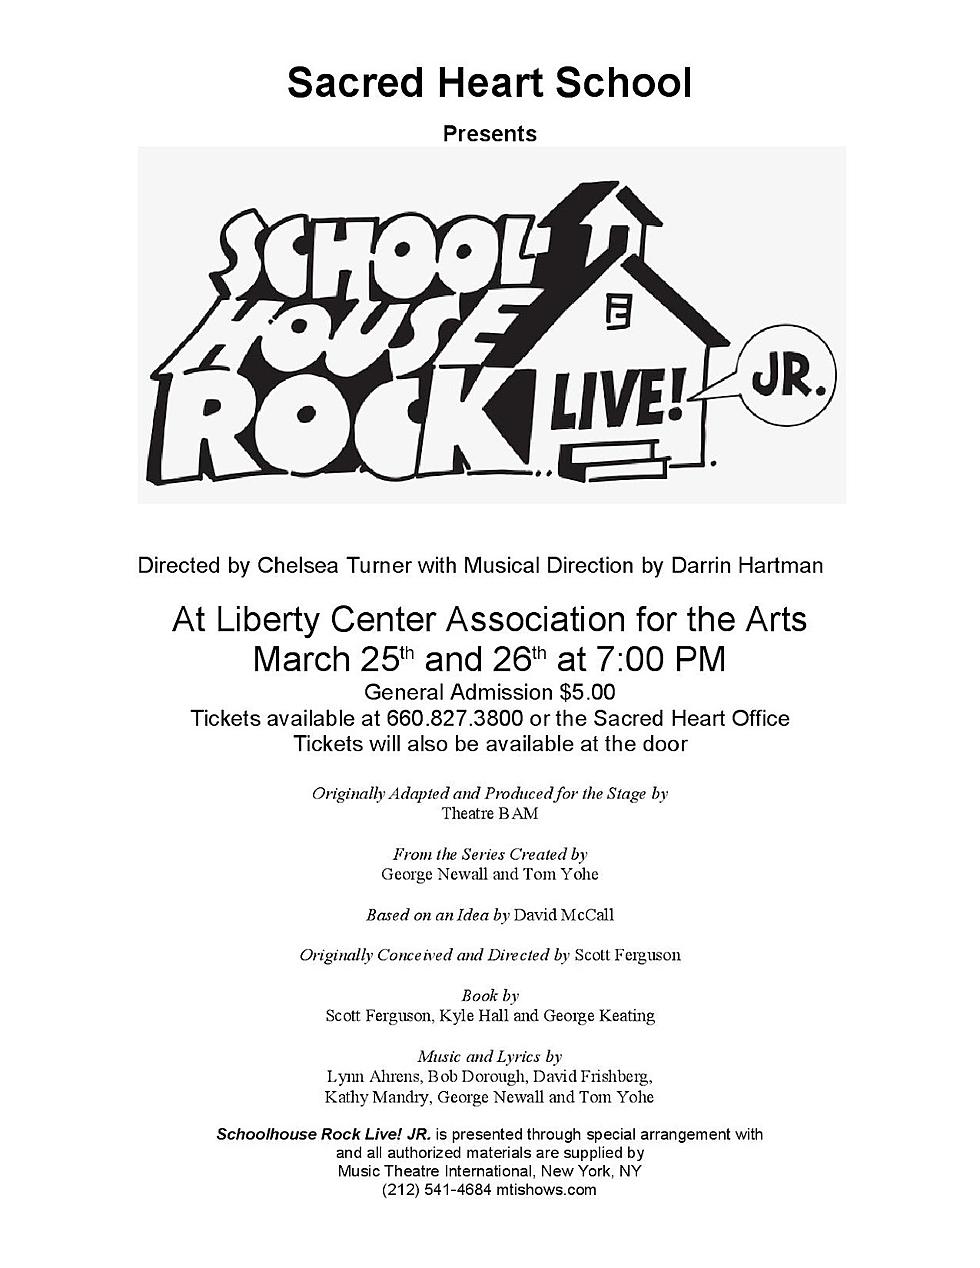 ‘School House Rock, Live Junior’ To Be Presented at Liberty Center